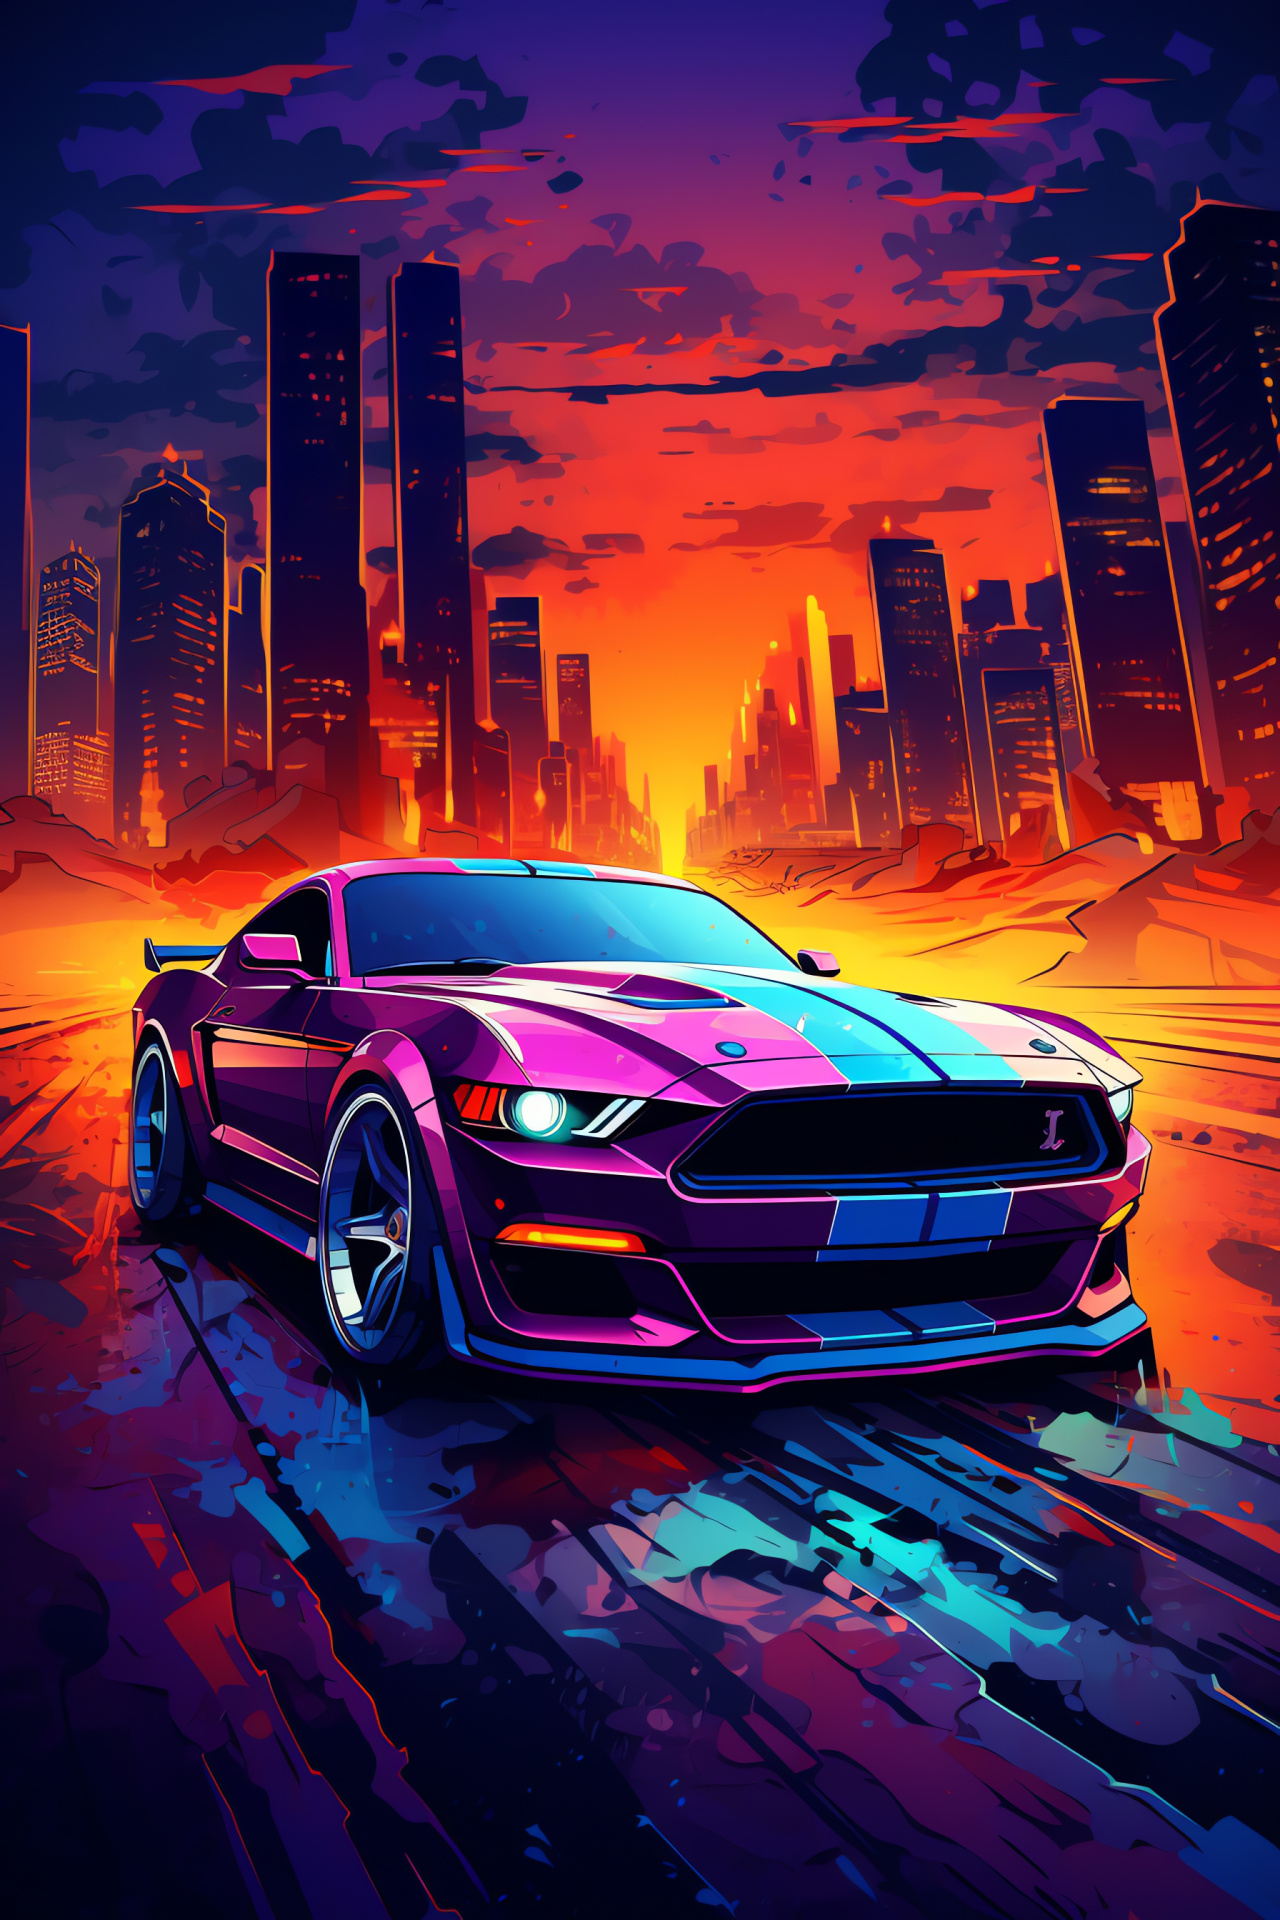 Mustang in view, Neon city reflection, Sci-fi urban layout, Lively artistic city, Sleek car foreground, HD Phone Image